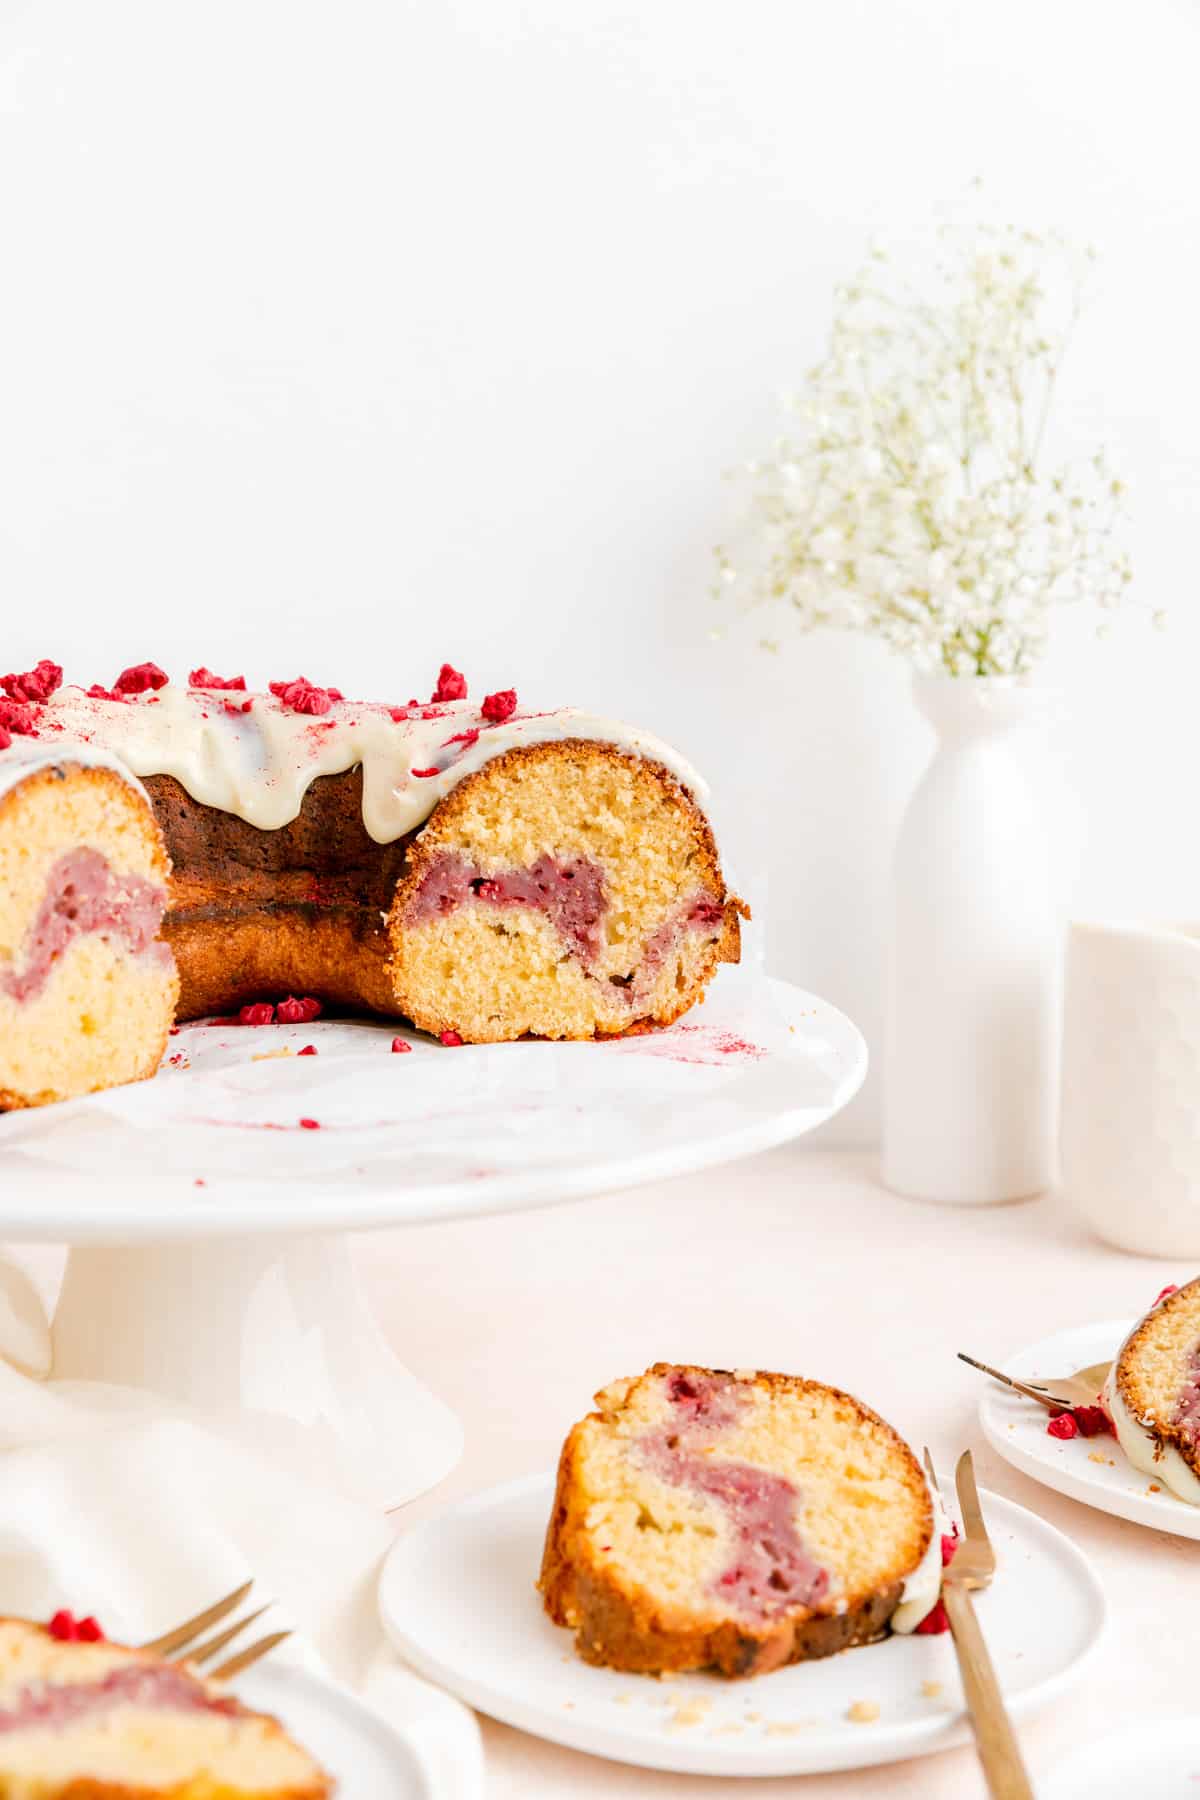 Cut Raspberry white chocolate Bundt cake on white cake stand with slices below on plates.